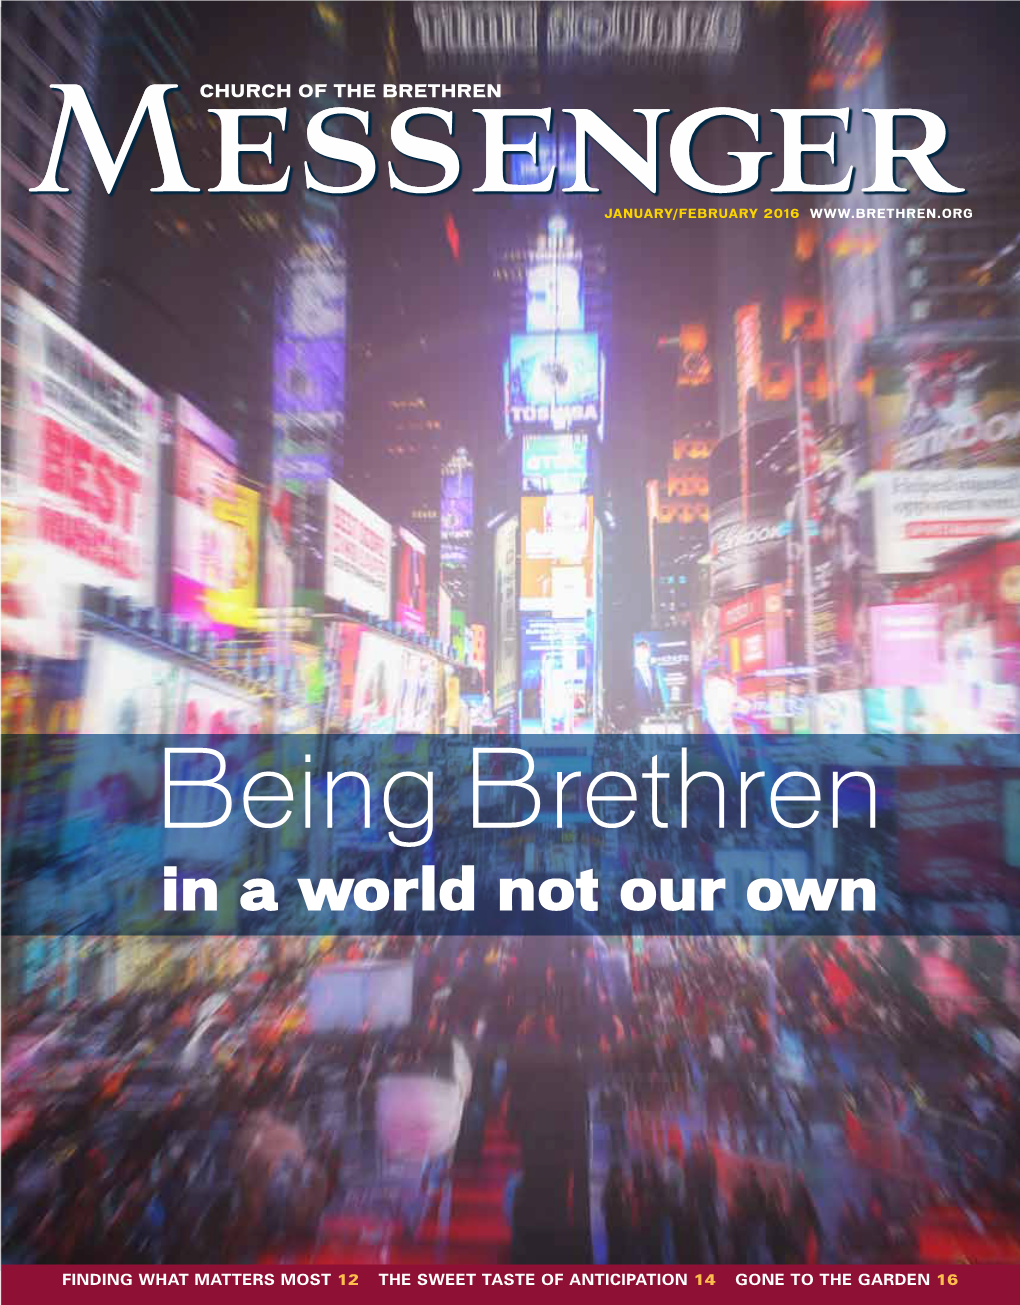 Being Brethren Global Mission and Service Congregational Life Ministries Brethren Disaster Ministries in a World Not Our Own the Global Food Crisis Fund